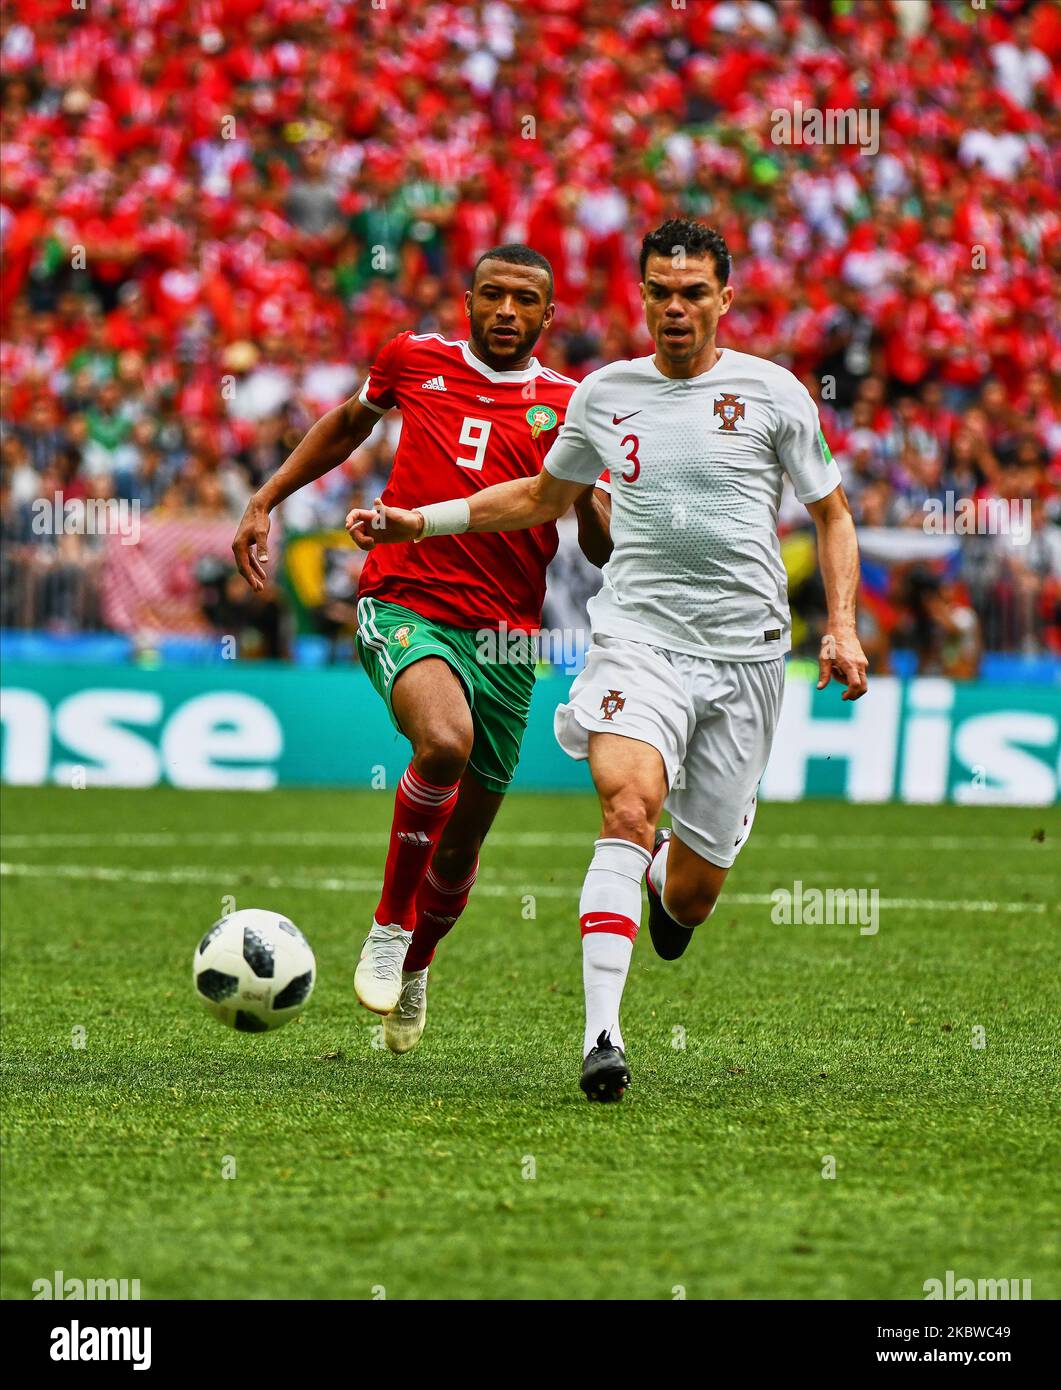 Pepe of Portugal and Ayoub El Kaabi of Morocco during the FIFA World Cup match Portugal versus Morocco at Luzhniki Stadium, Moscow, Russia on June 20, 2018. (Photo by Ulrik Pedersen/NurPhoto) Stock Photo